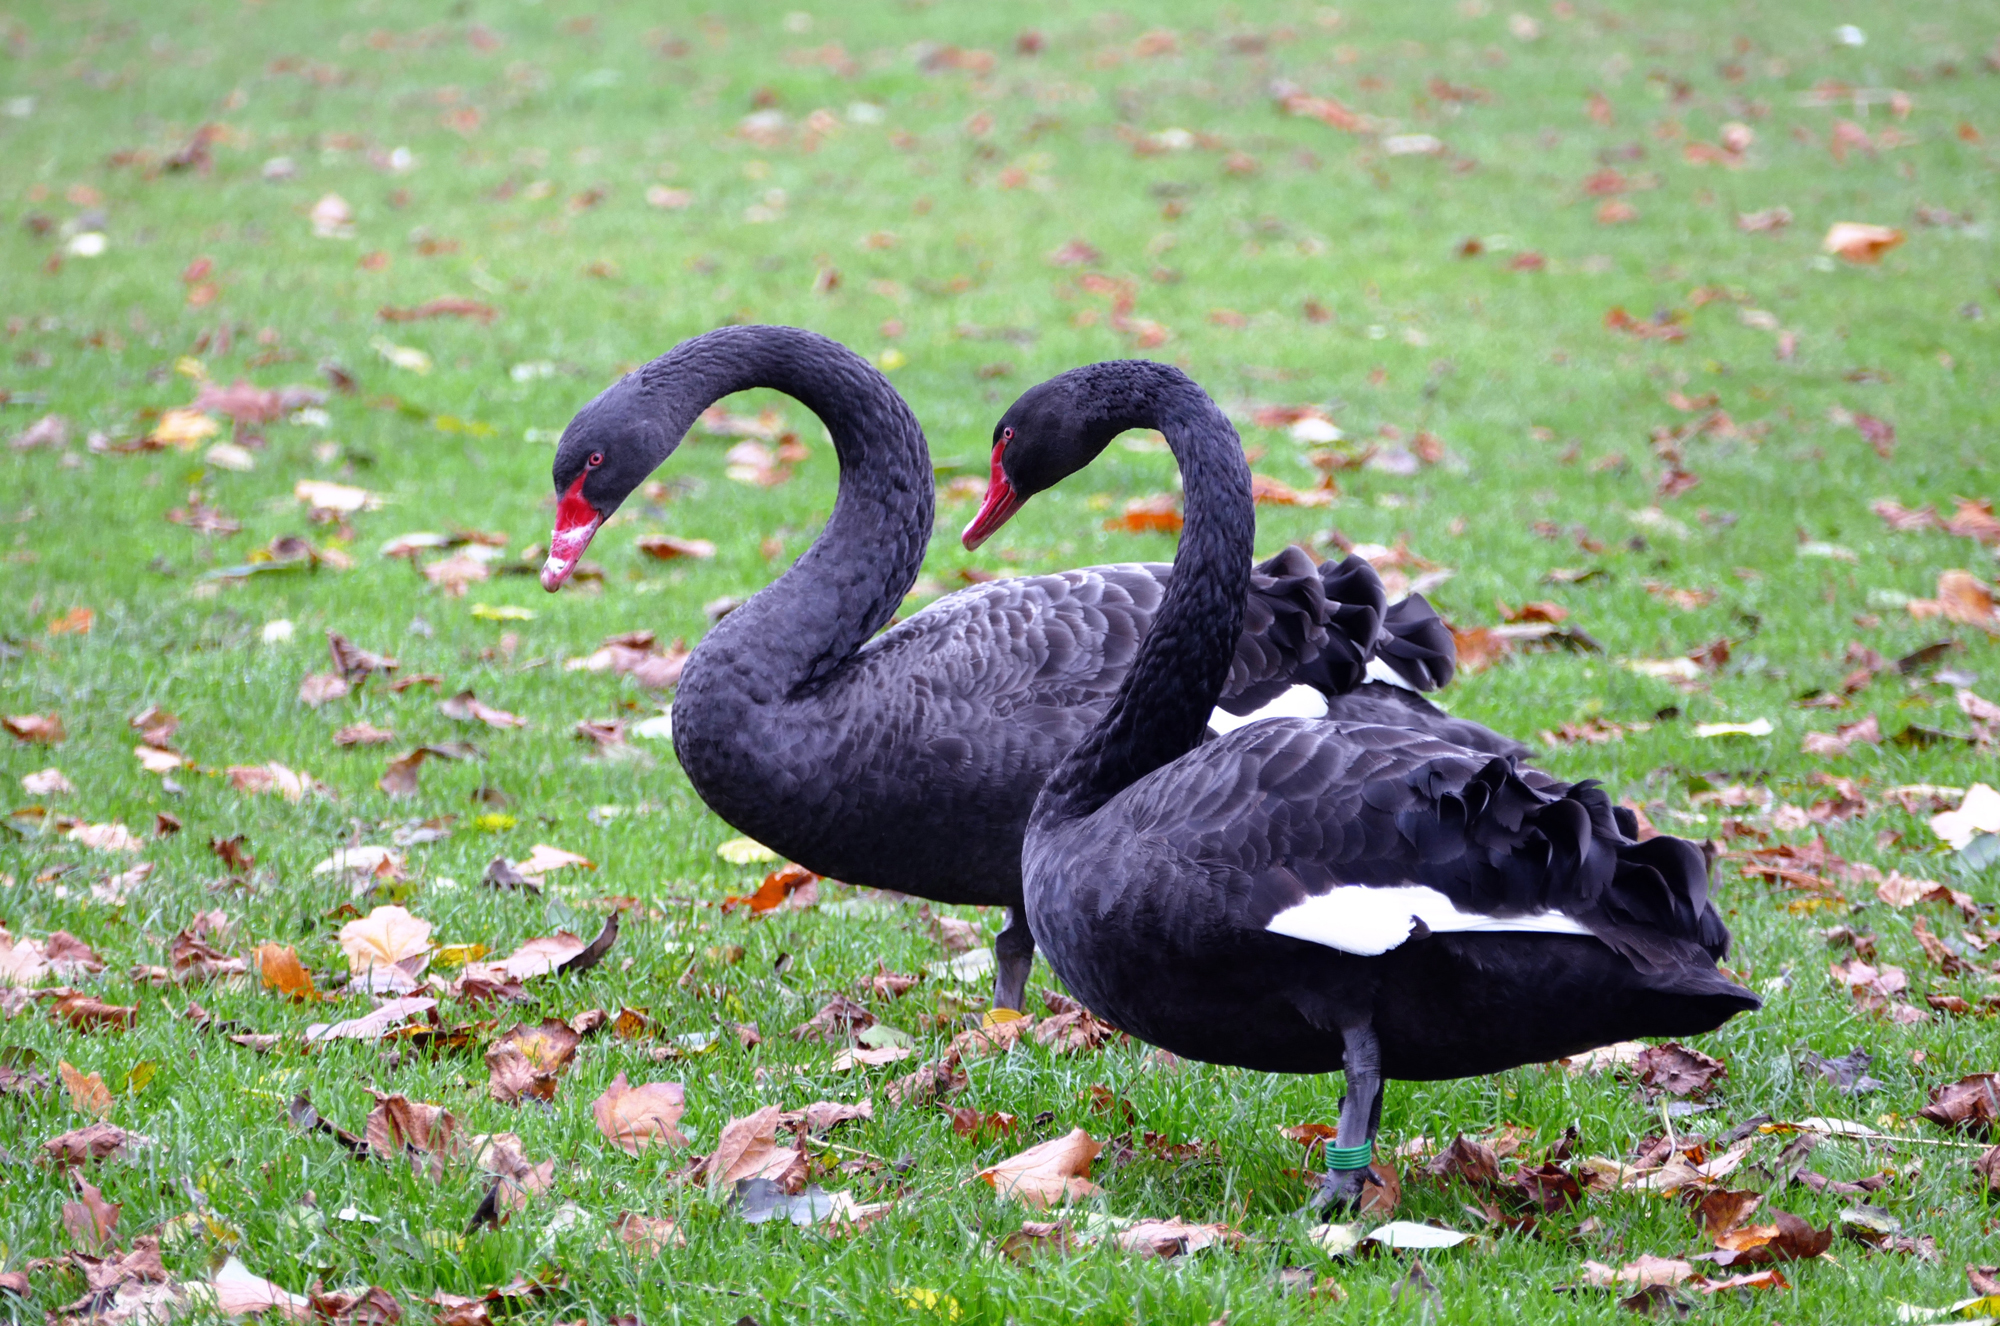 Black swans, cognition, and the power of learning from failure